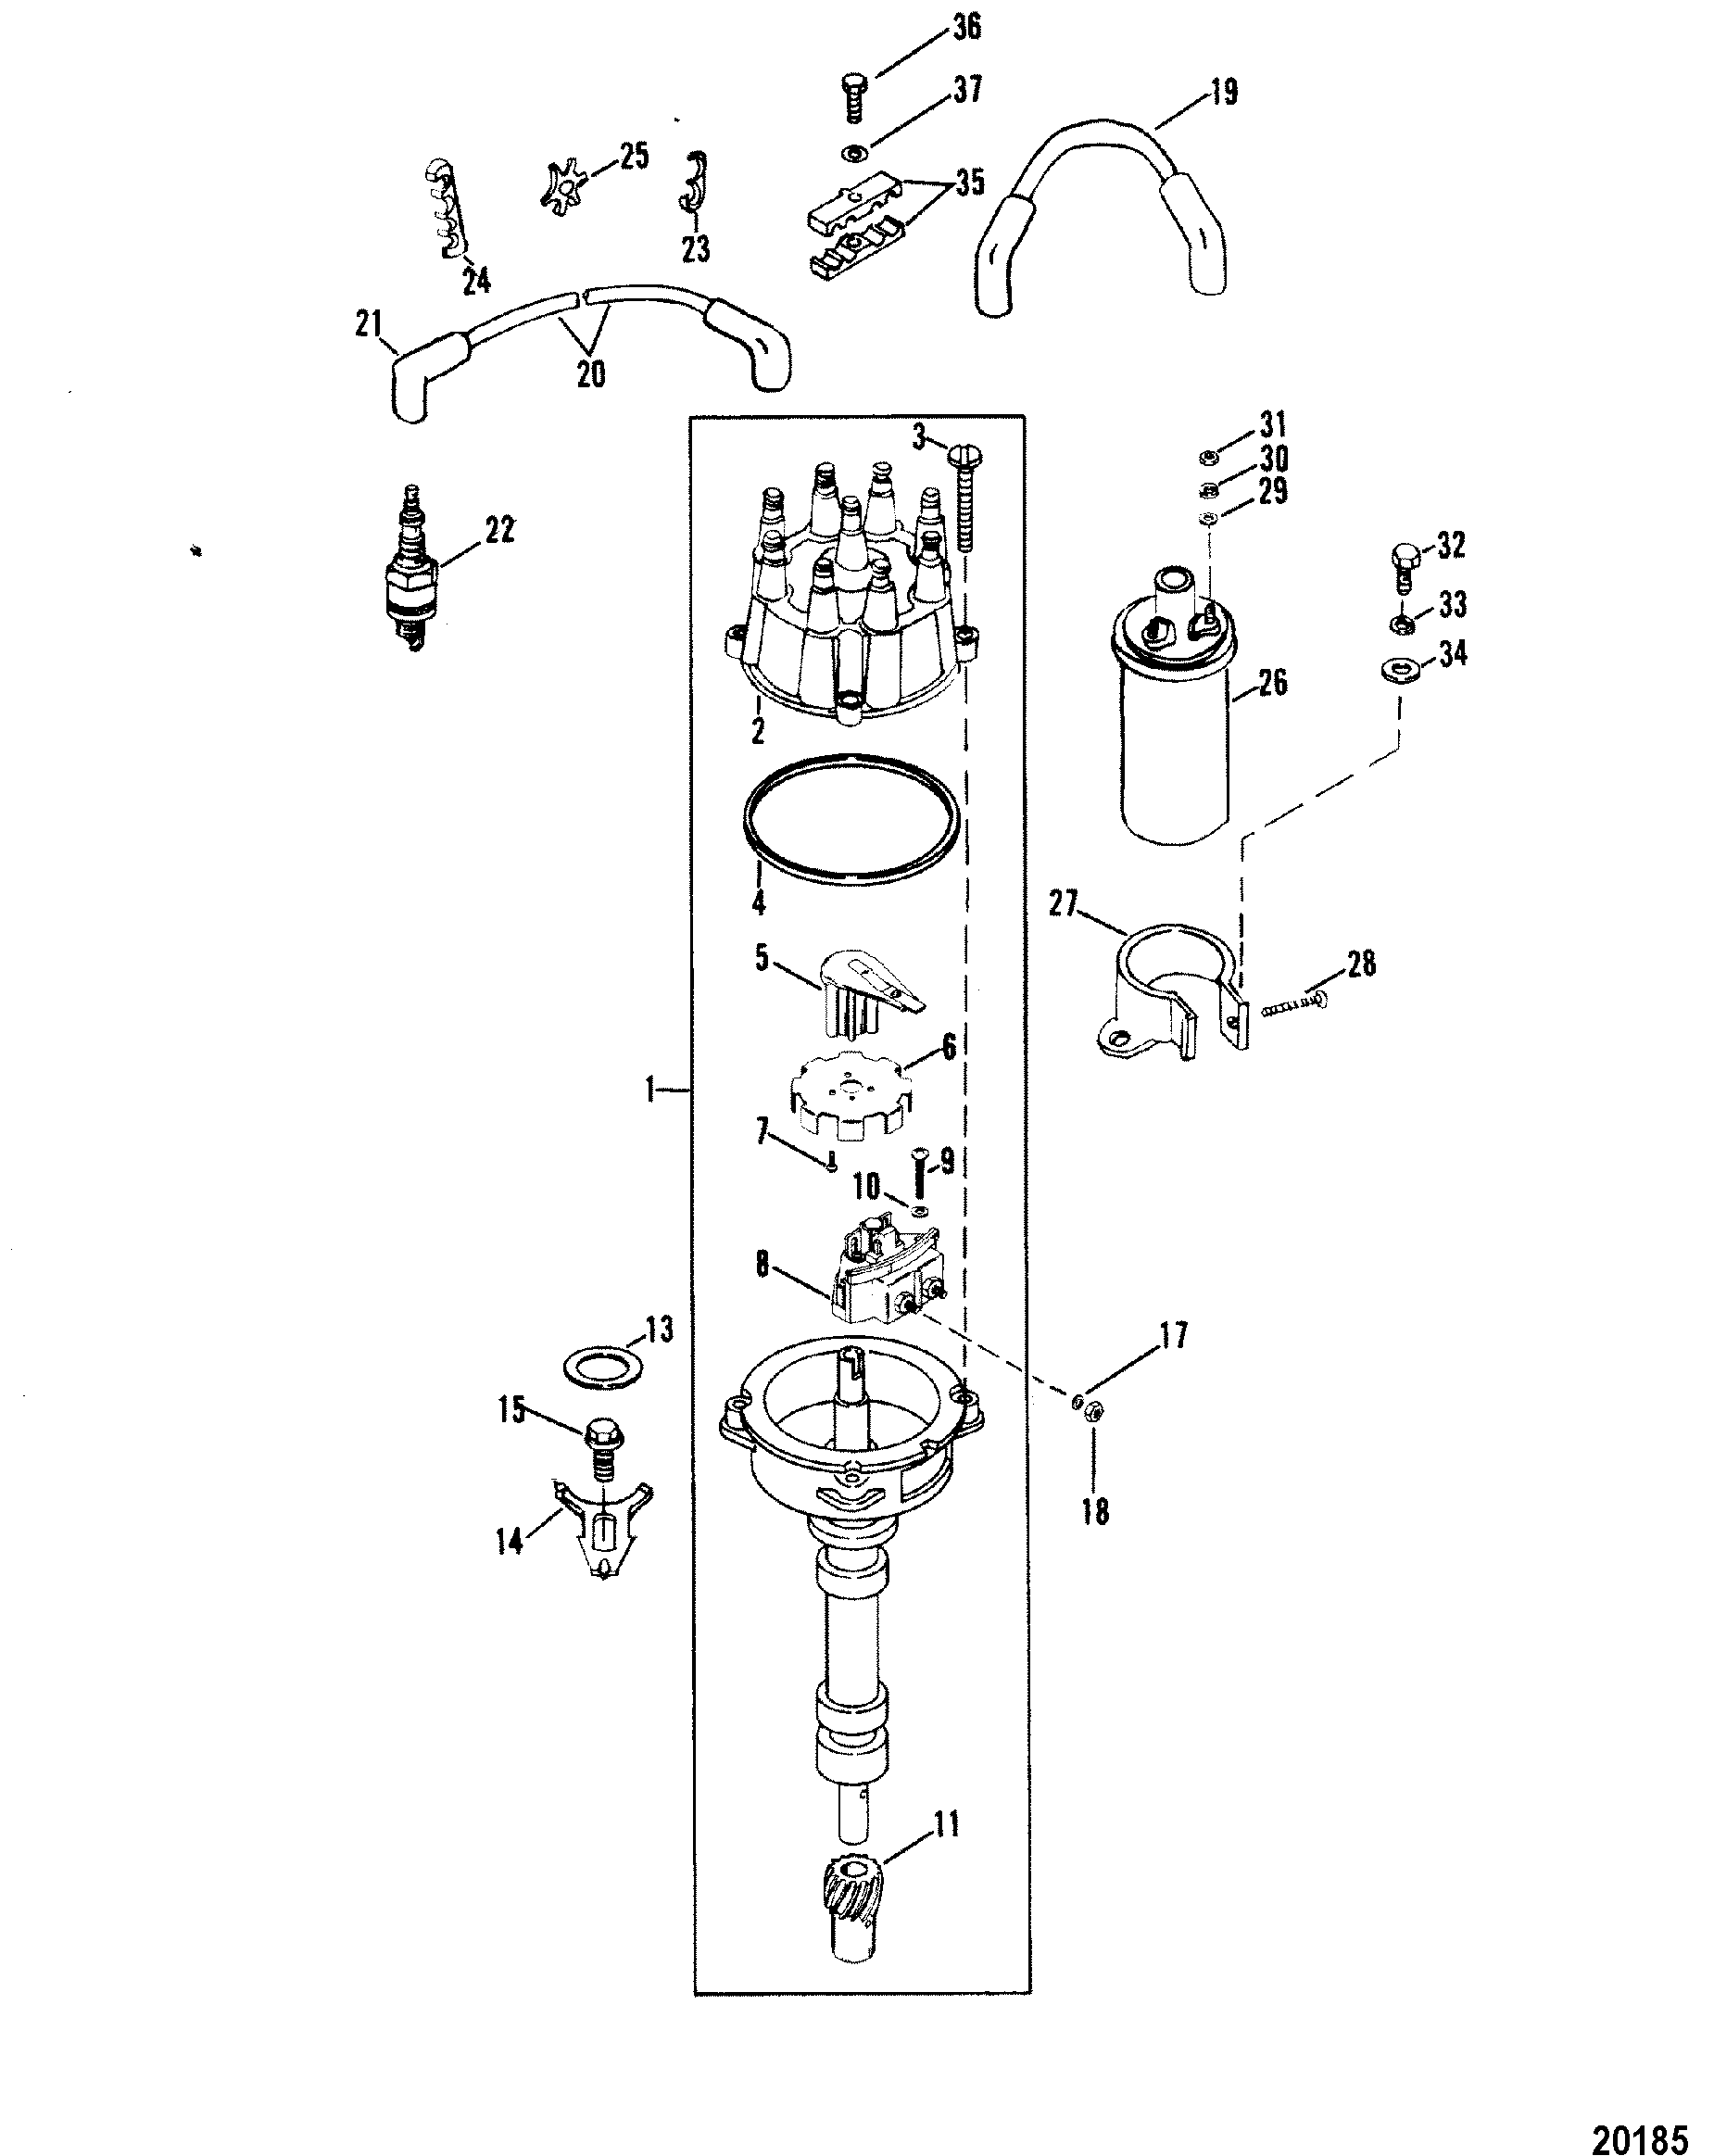 Distributor and Ignition Components